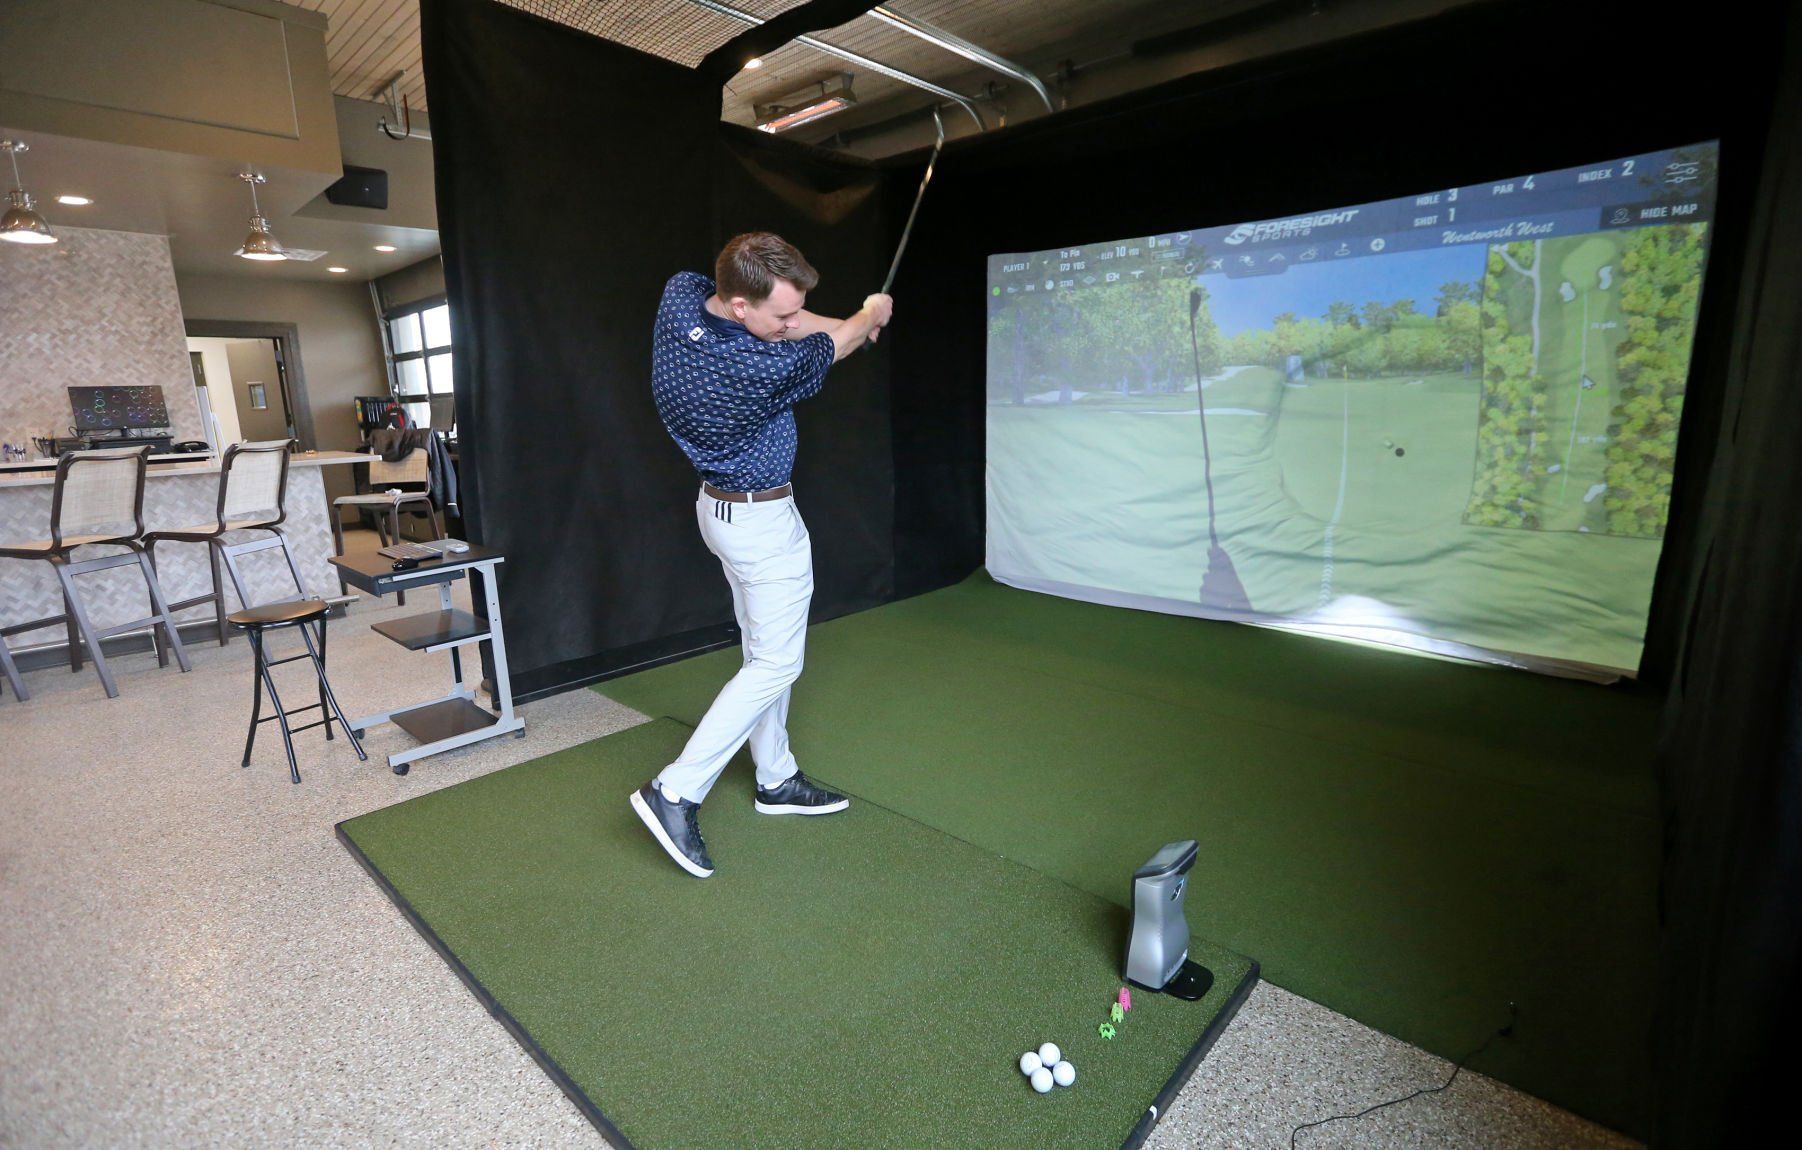 Carson Hillery, recreation supervisor at Thunder Hills Country Club, uses the golf simulator in the newly renovated cabana at the club in Peosta, Iowa, on Thursday, March 3, 2022.    PHOTO CREDIT: JESSICA REILLY